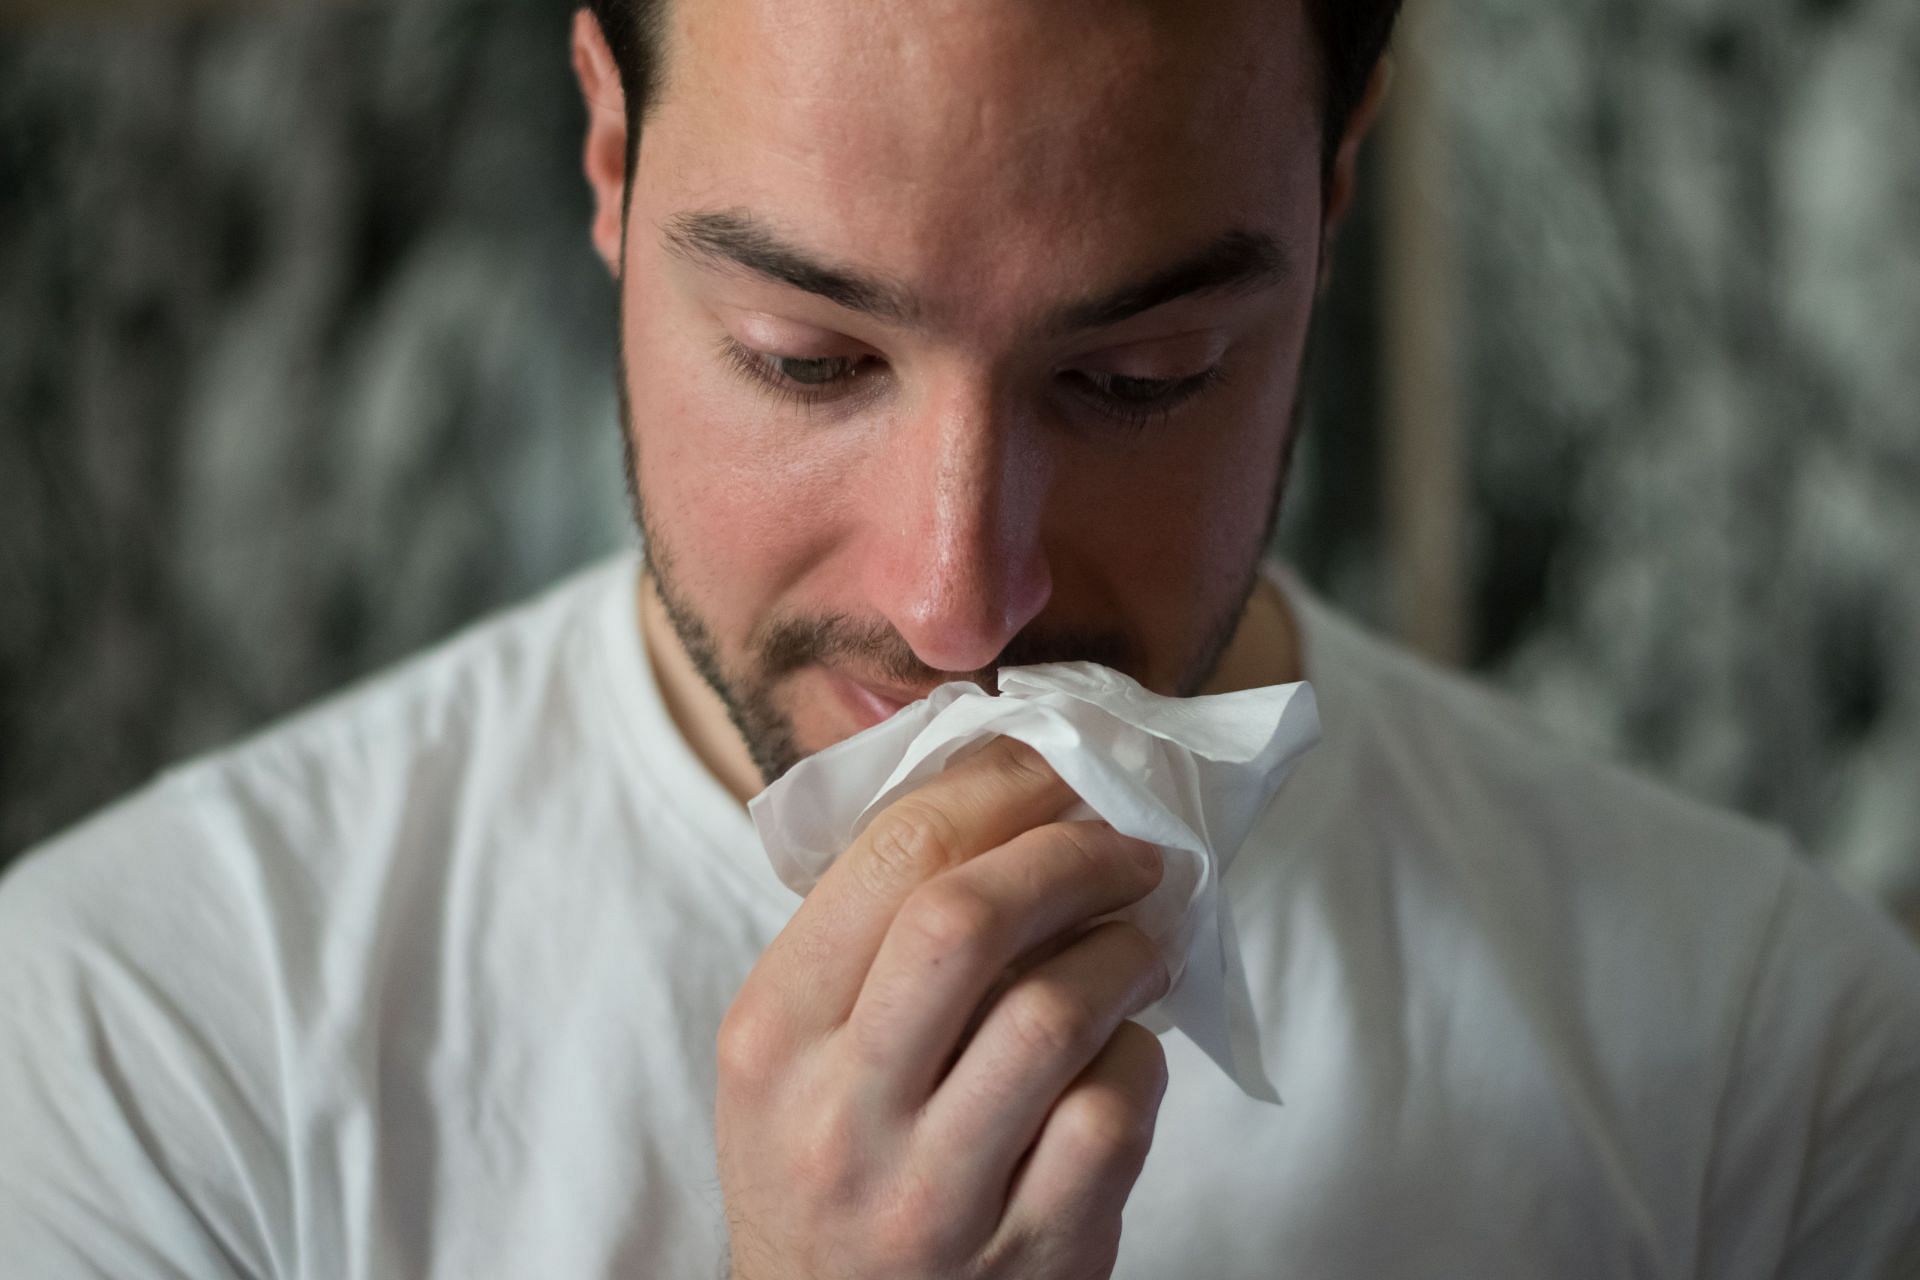 Spring allergies may result in stuffy and runny nose. (Image via Unsplash/ Brittany Colette)